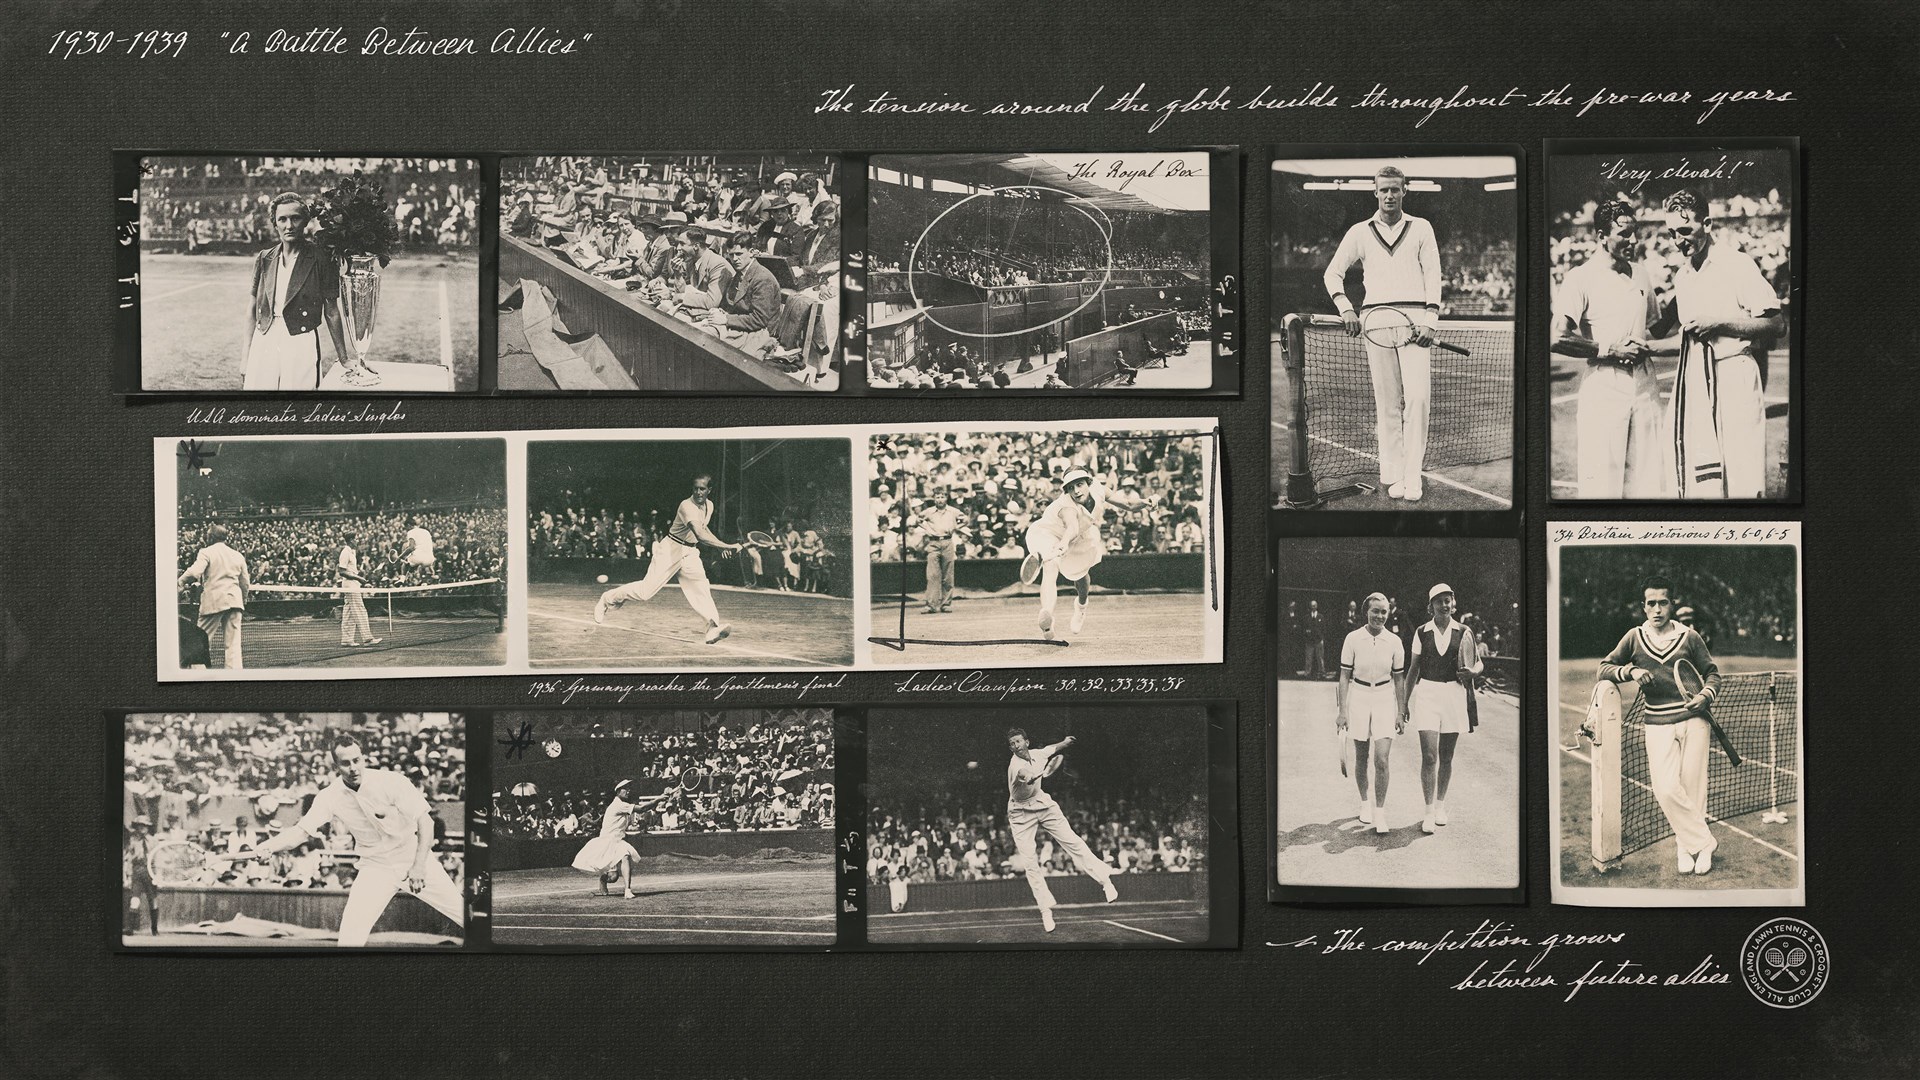 An NFT in the Wimbledon Centenary Collection representing the decade 1930-1939 (AELTC)